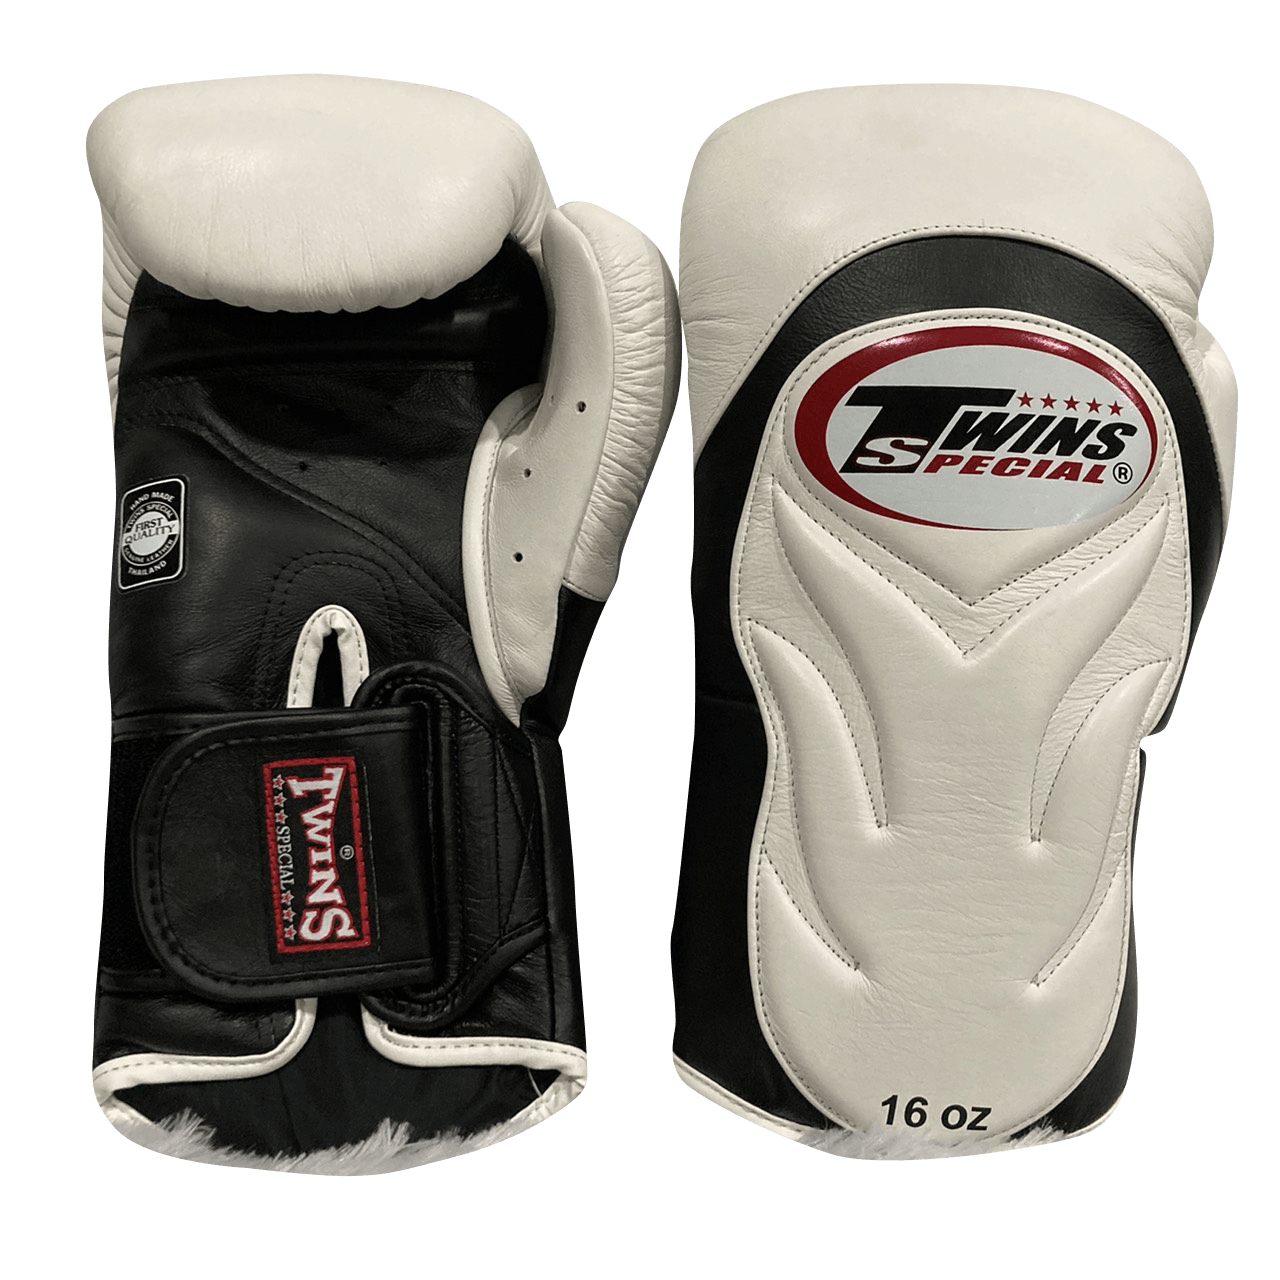 Twins Special Boxing Gloves BGVL6 Black White